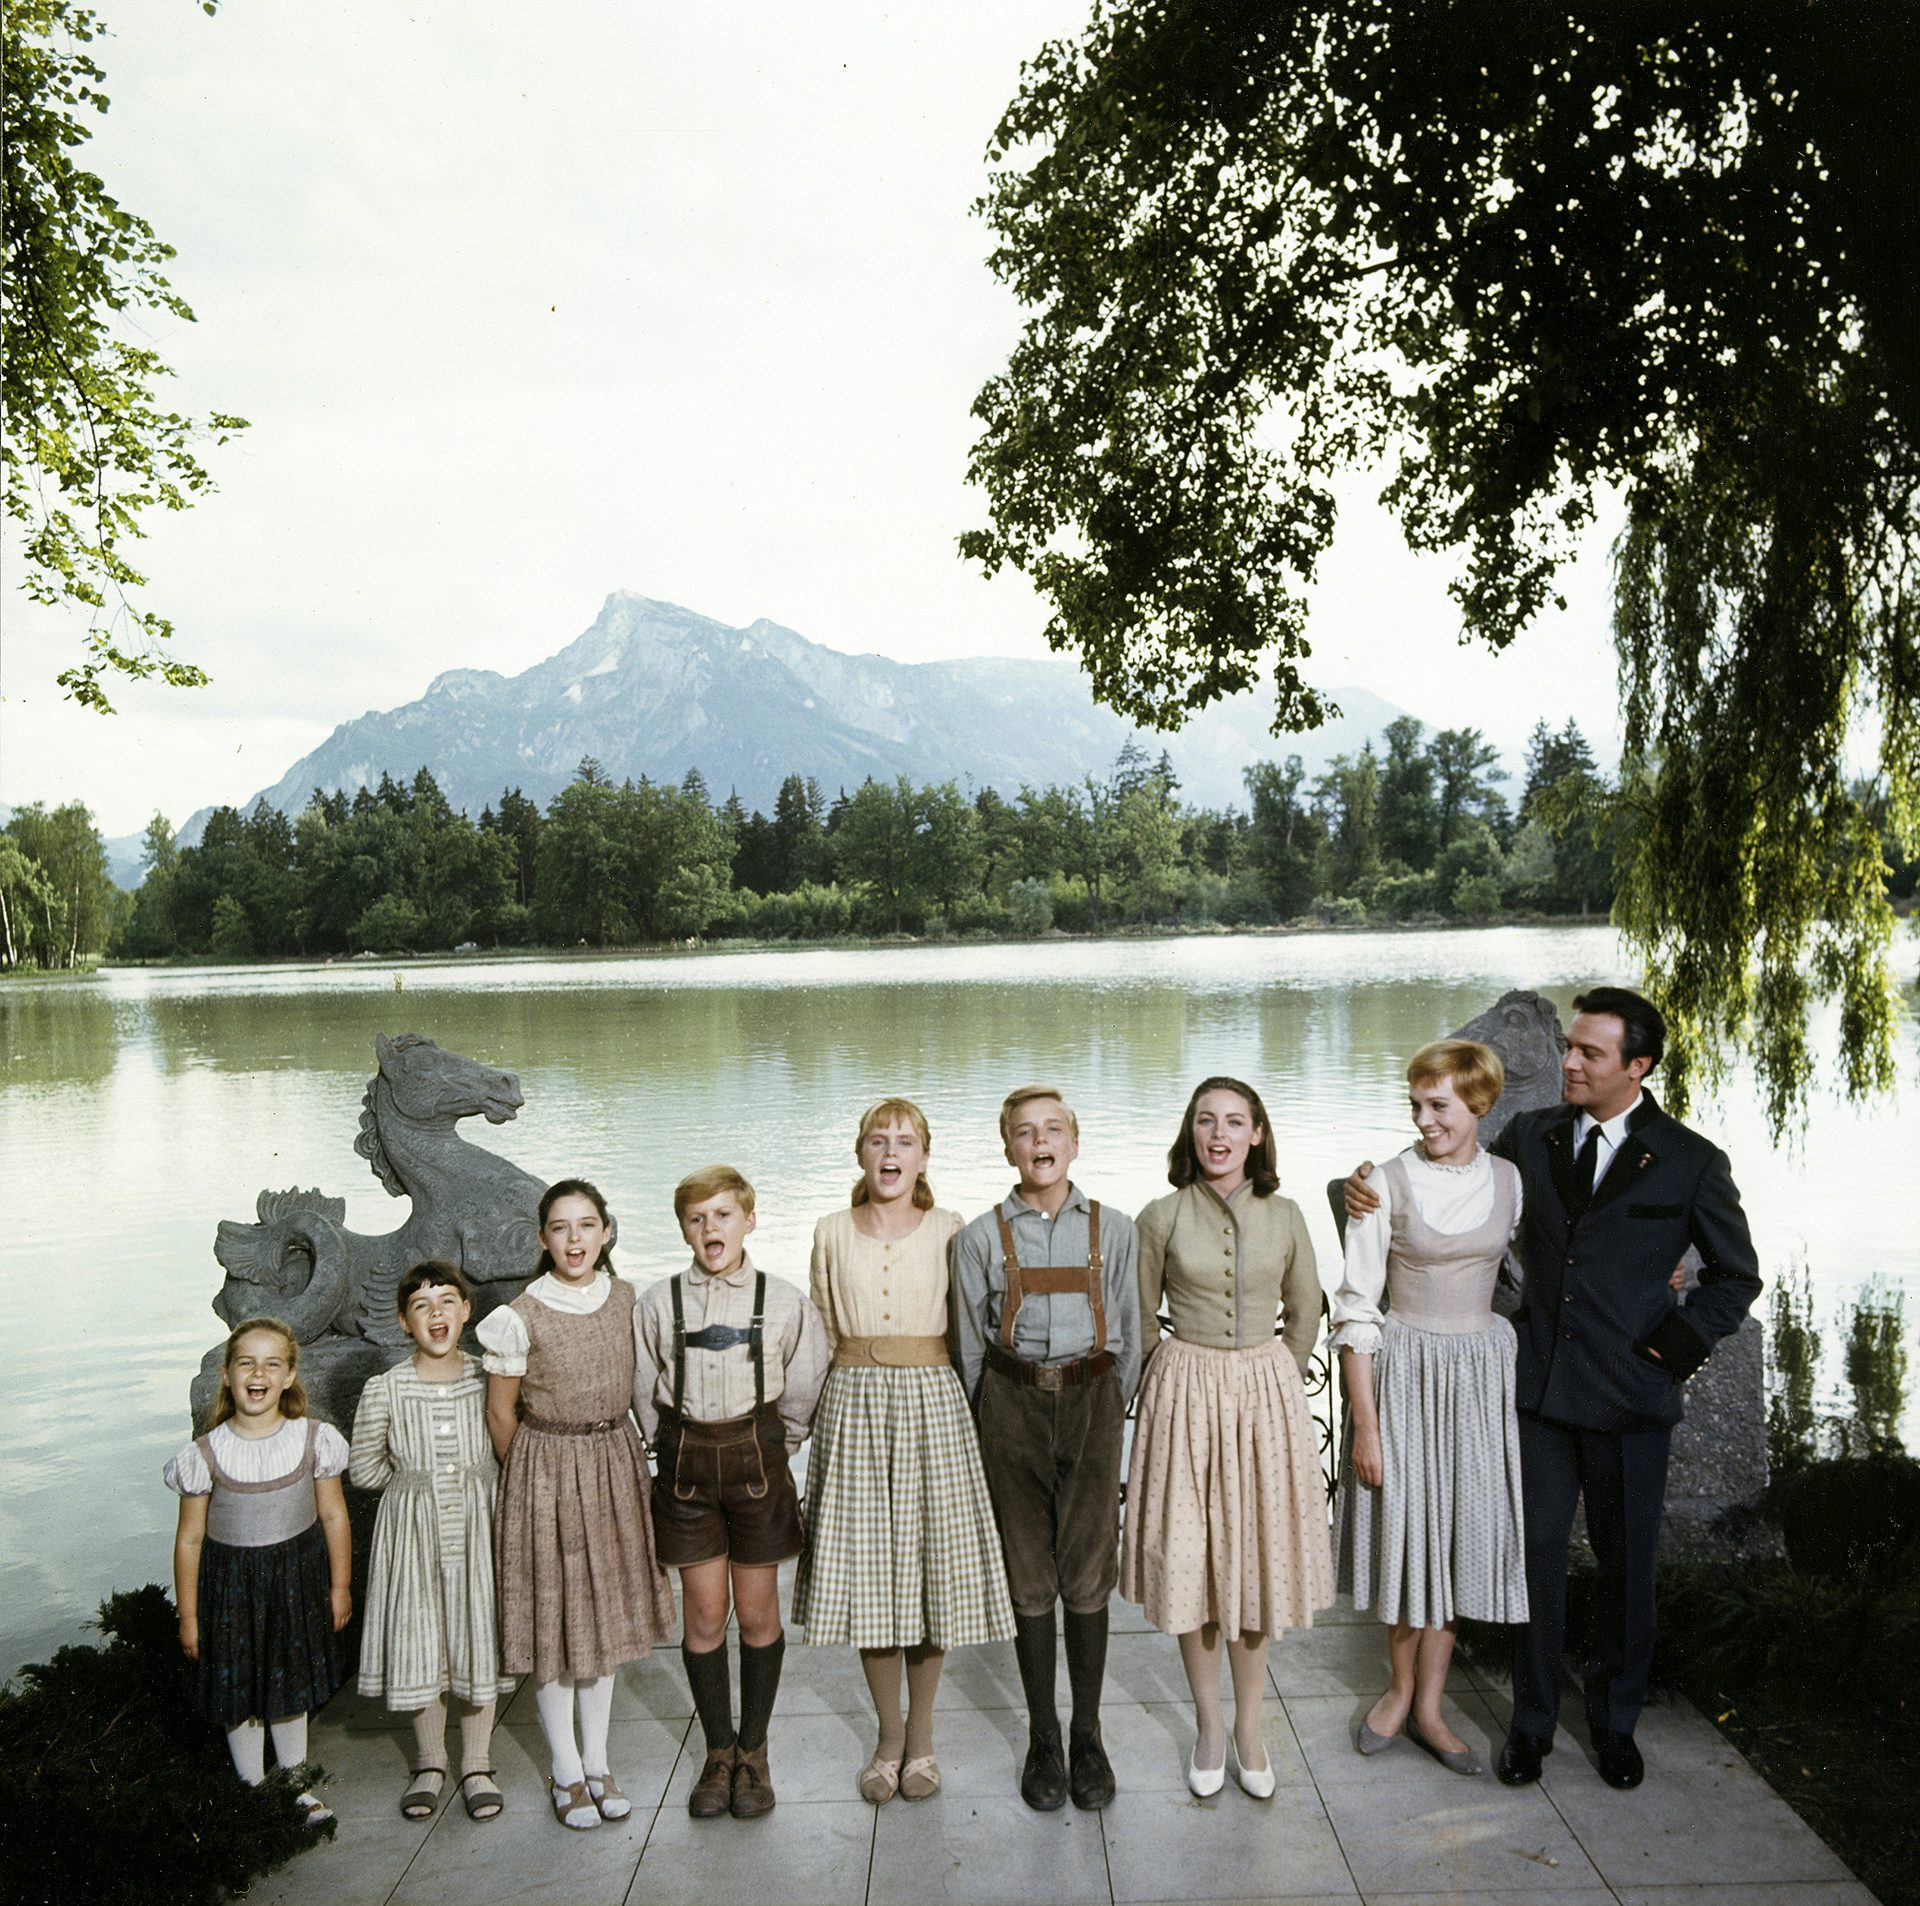 Still from the Sound of Music showing the Von Trapp family by the lake